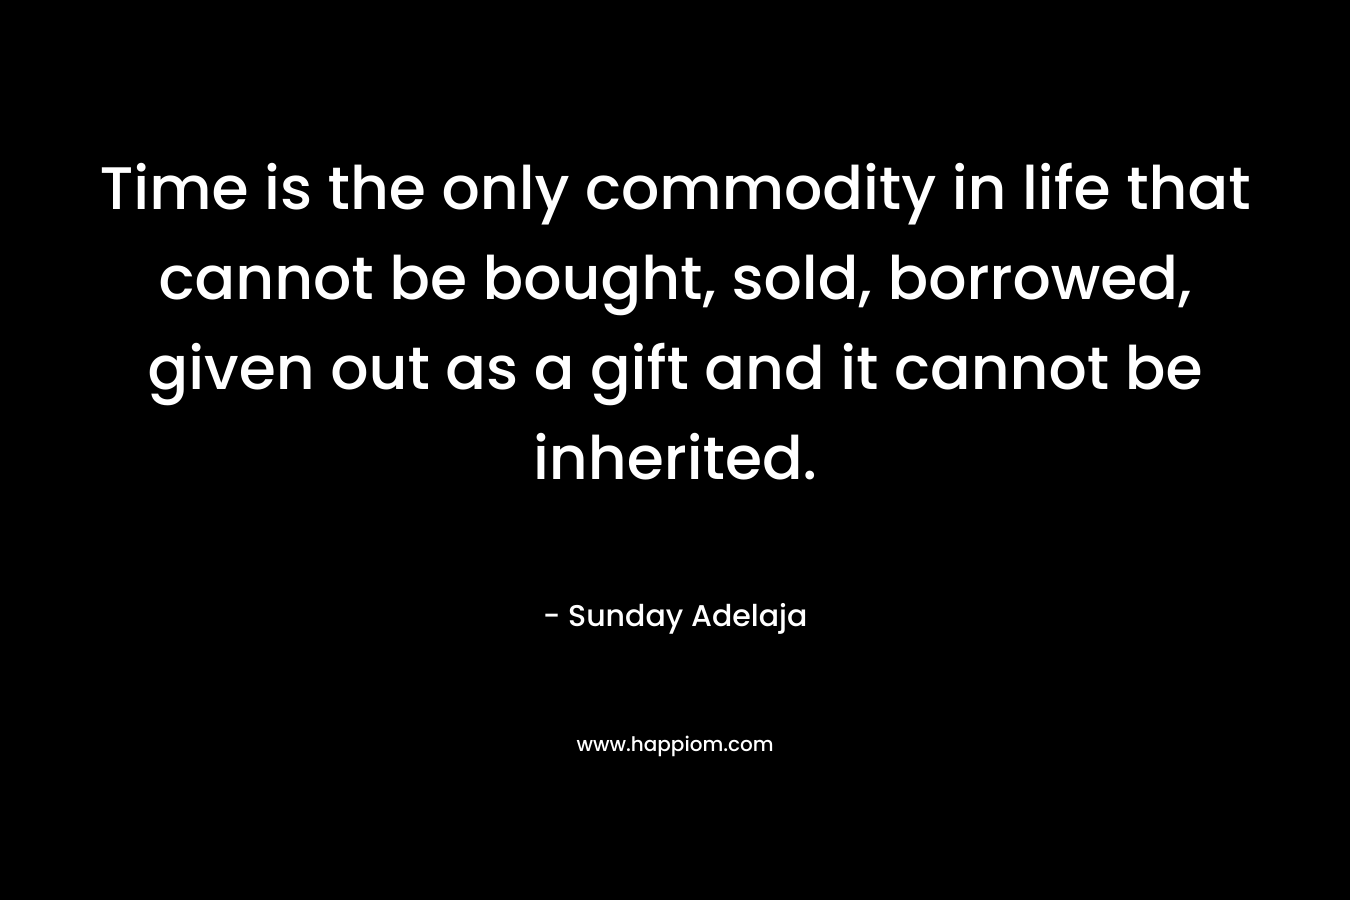 Time is the only commodity in life that cannot be bought, sold, borrowed, given out as a gift and it cannot be inherited. – Sunday Adelaja